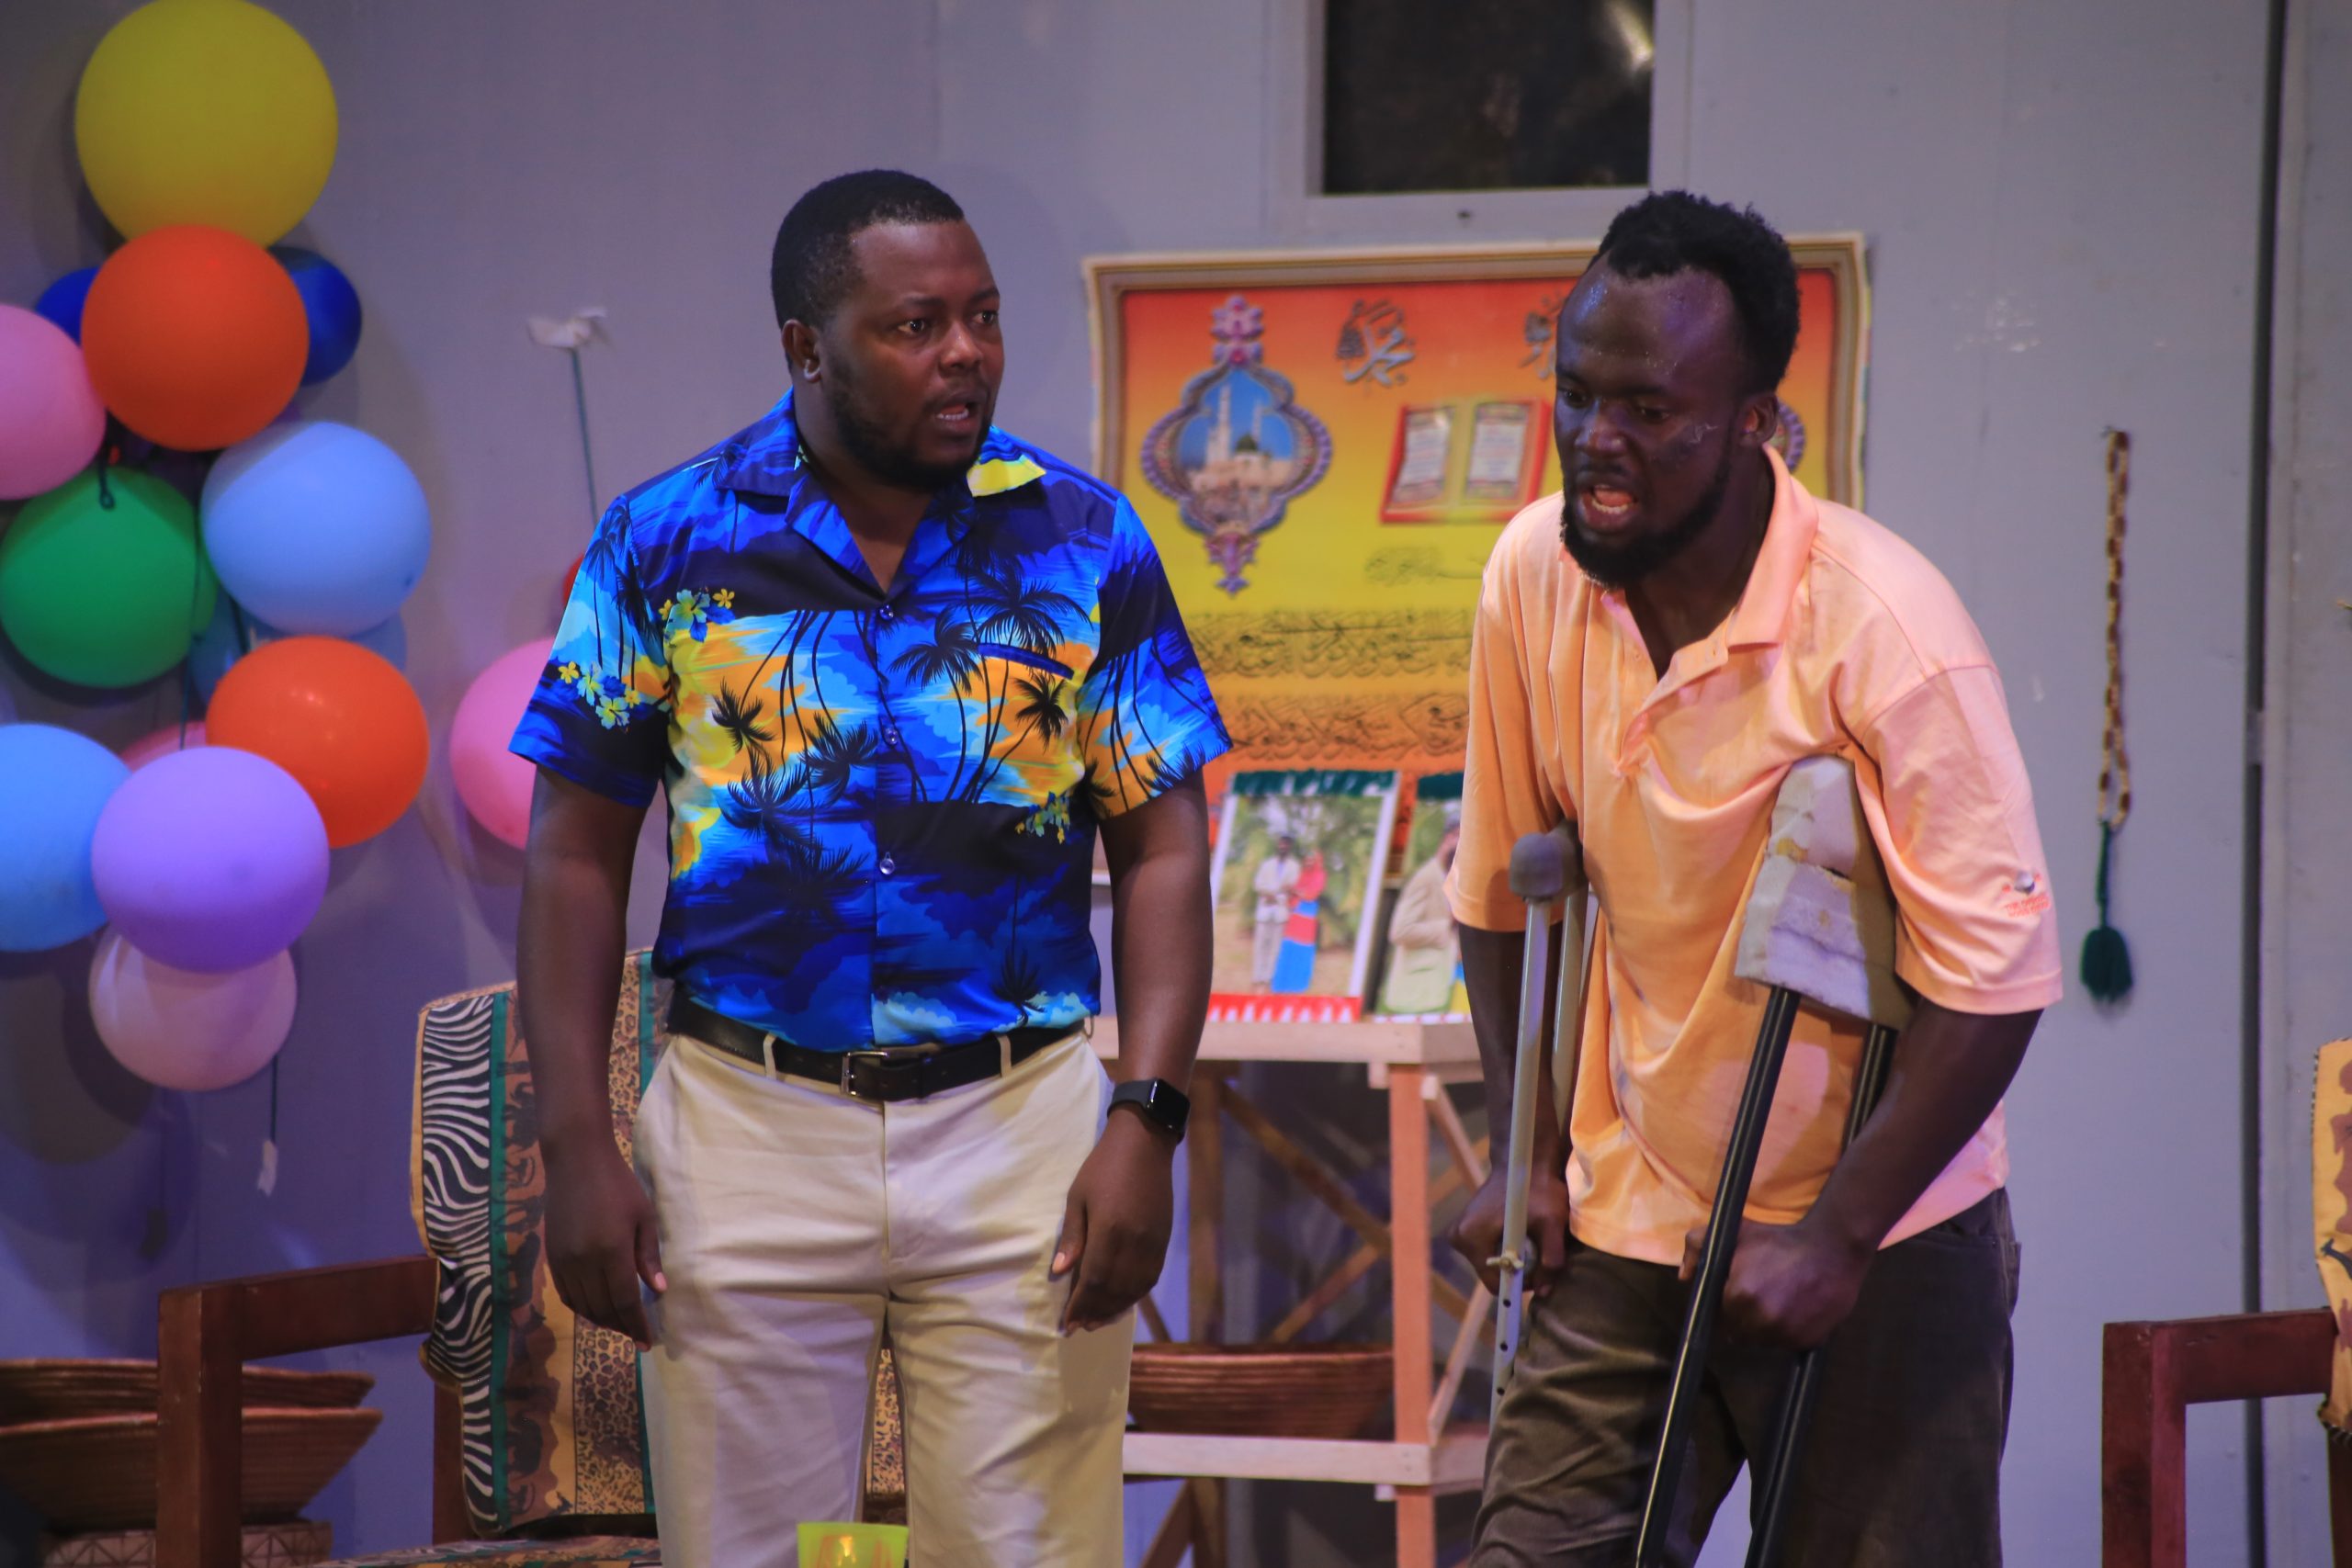 Man to Man was directed by Amelia Mbotto Kyaka and produced by Tebere Arts Fouundation (Photos by Kaggwa Andrew)